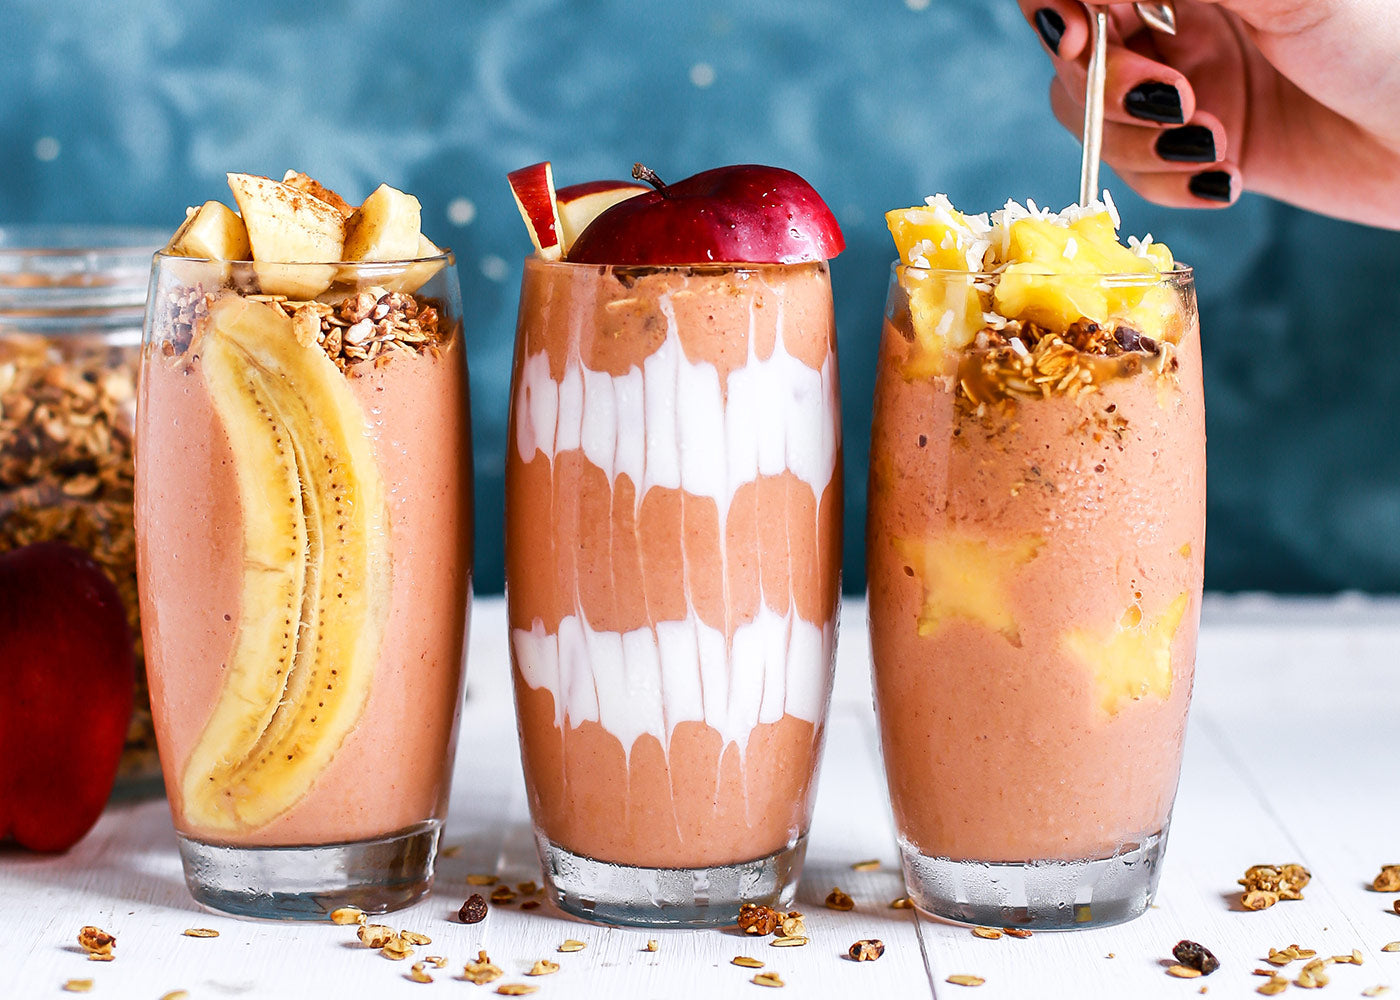 5 Smoothies To Help Boost That Summer Glow - Easy, Quick Recipes